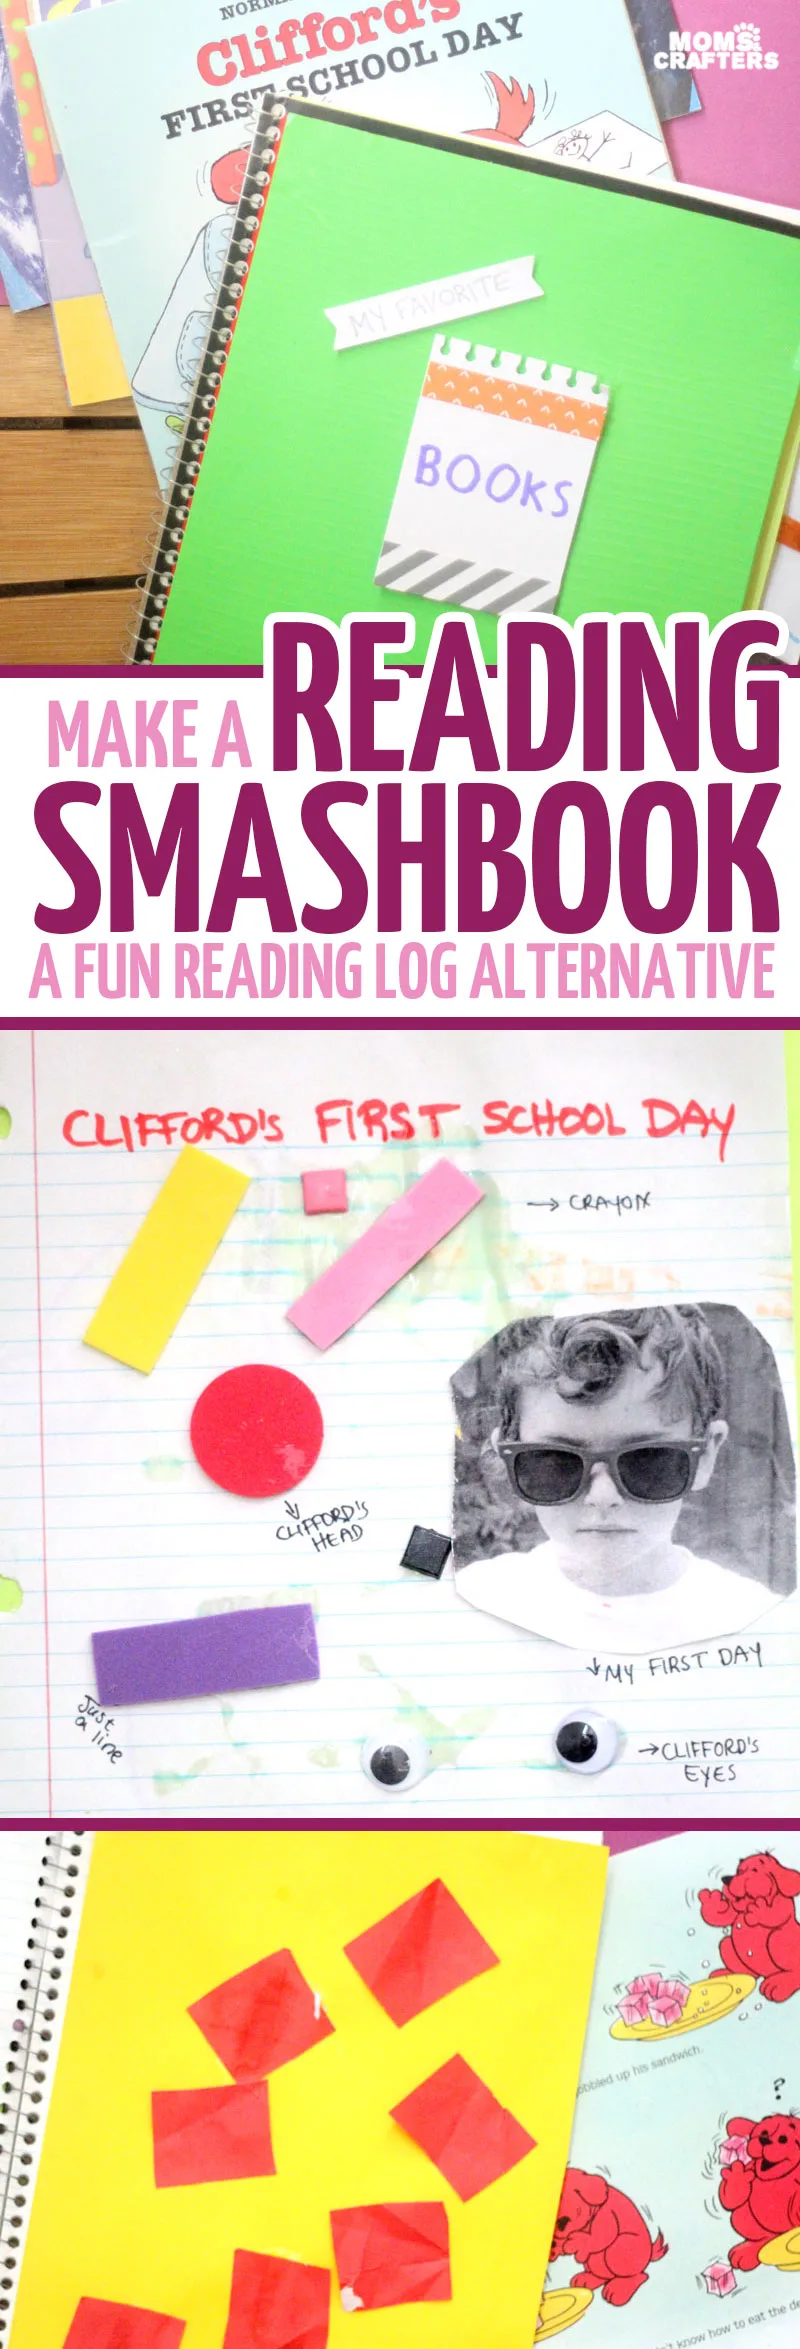 A reading smashbook is a super fun reading log alternative and a great way to inspire literacy in kids! My preschooler made one and wanted to share his ideas with you - it's super open-ended and way to make reading FUN!!